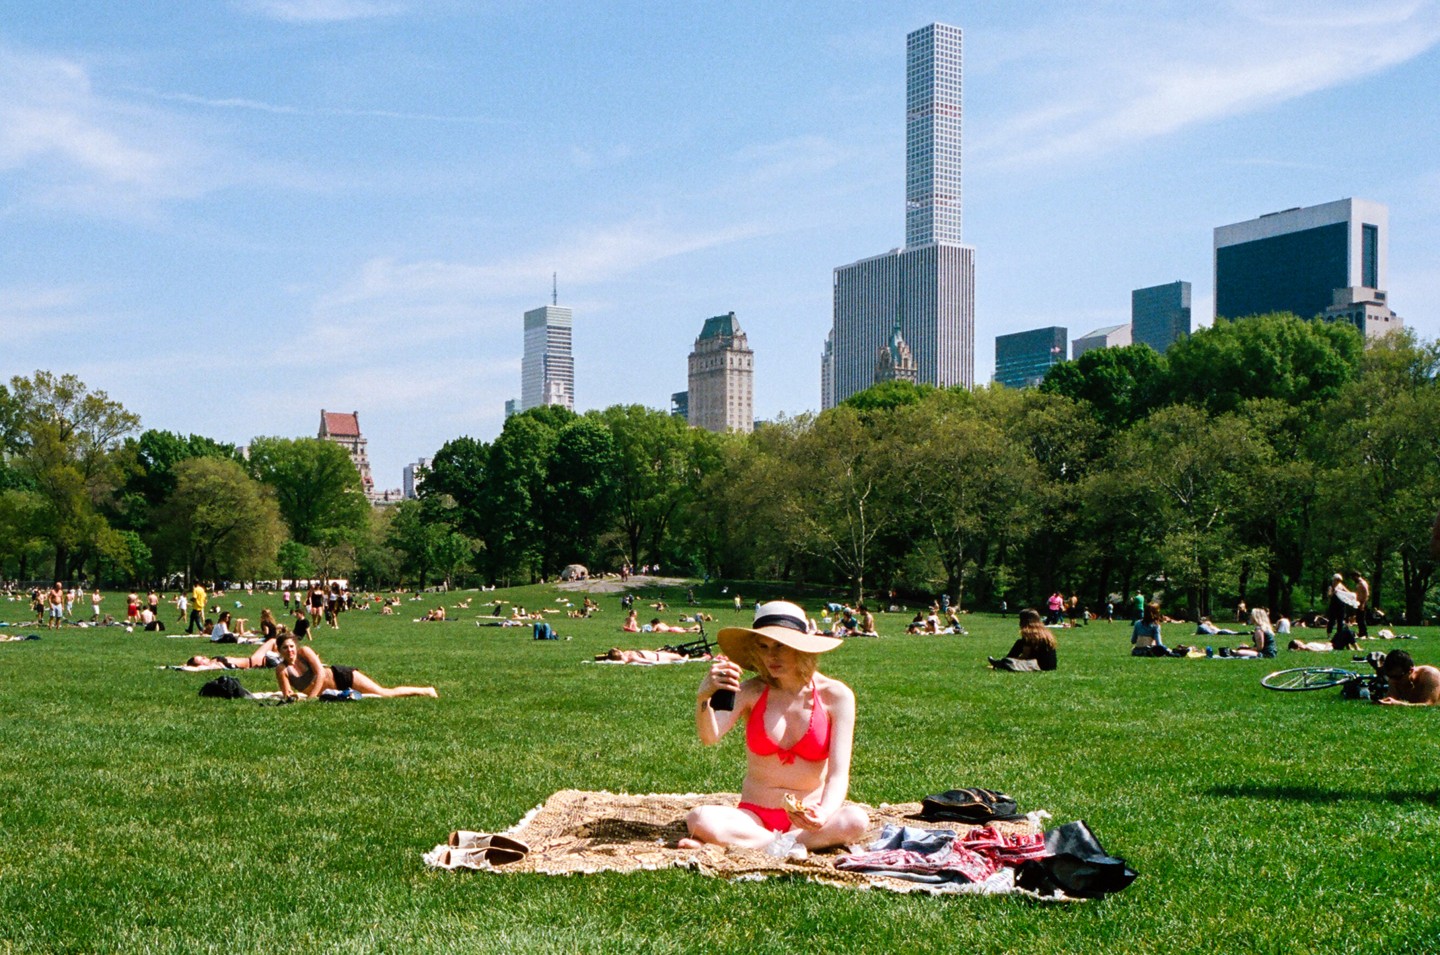 A Lurk At Summer In New York City’s Parks